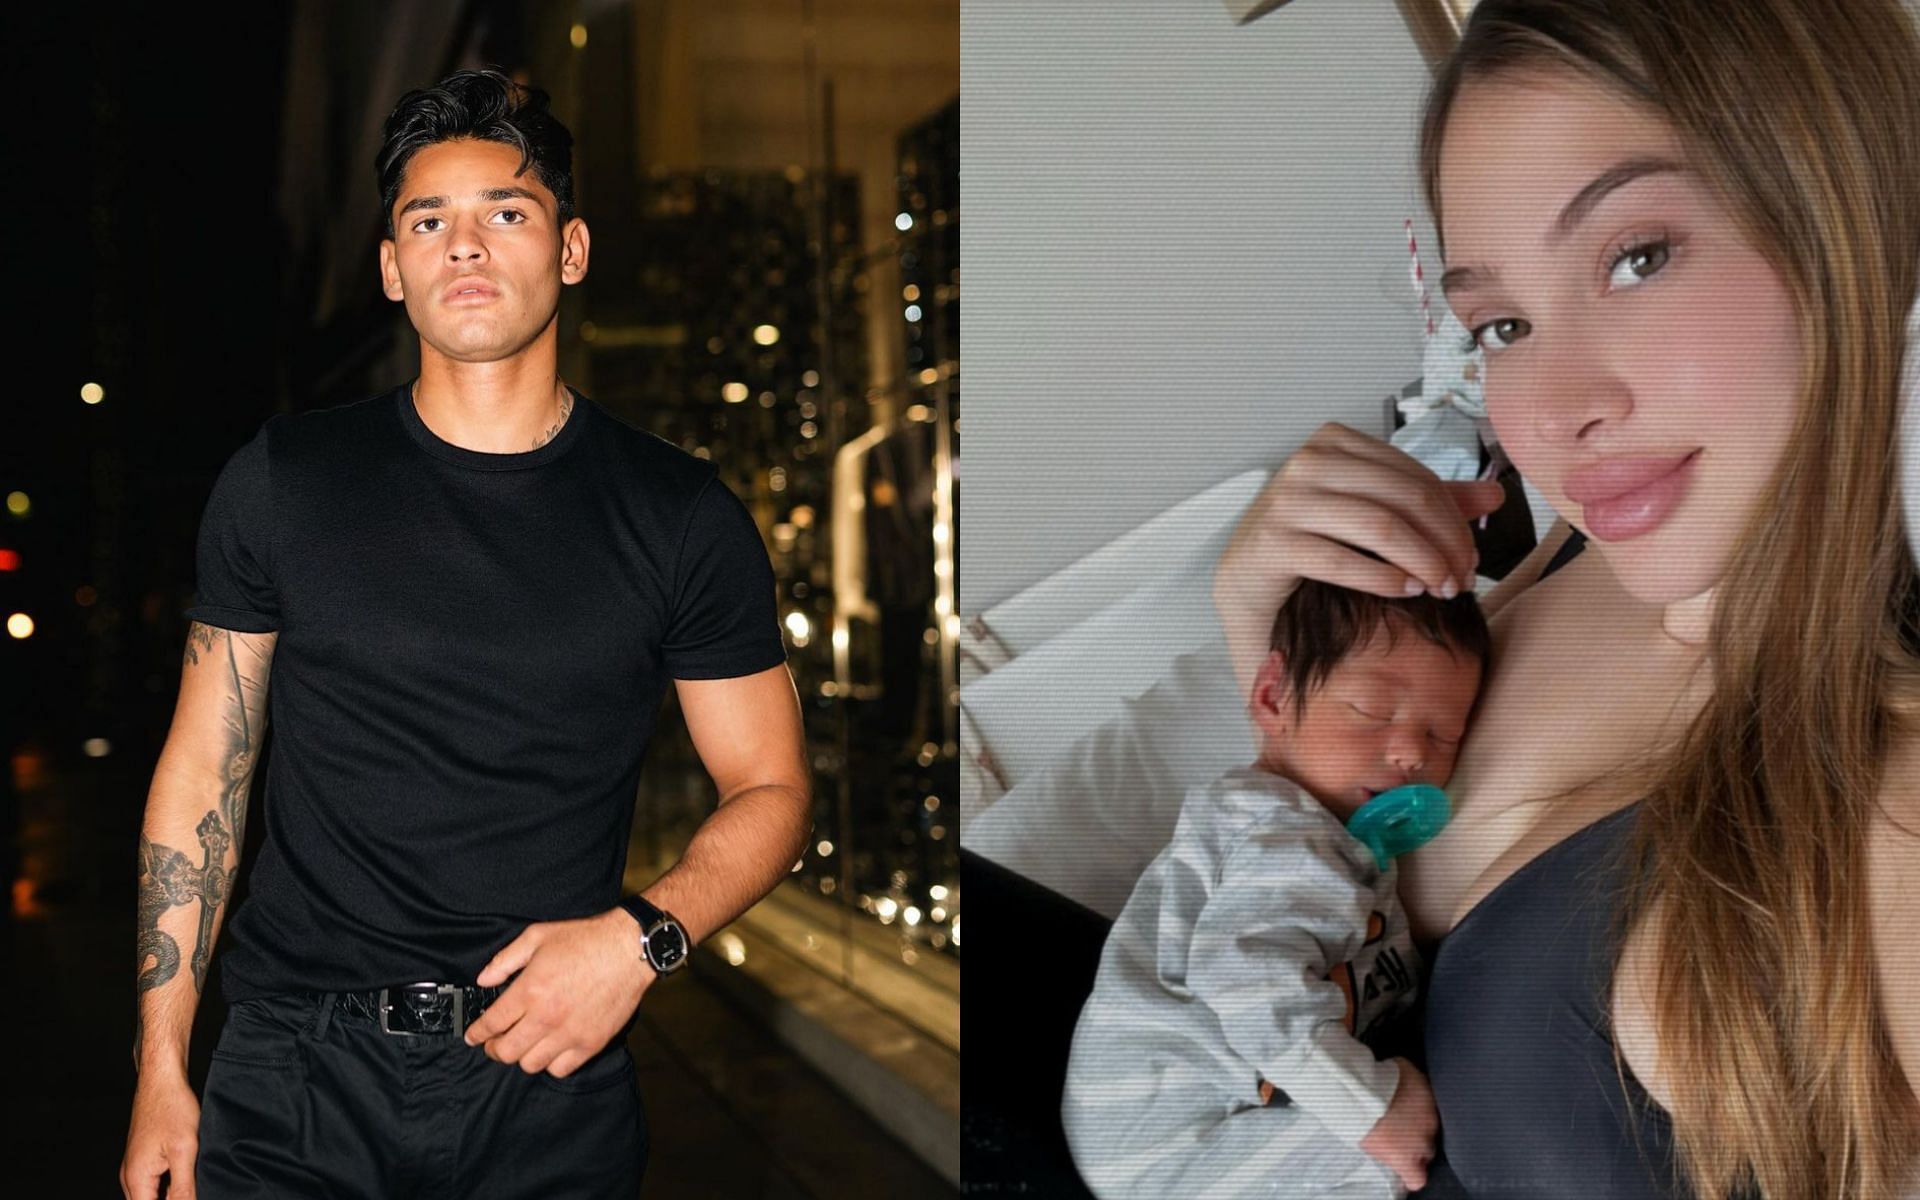 Ryan Garcia (left) announcing his divorce with his wife Andrea Celina (right) shortly after the birth of his son (right) [Photo Courtesy @kingryan and @dreacelina on Instagram]